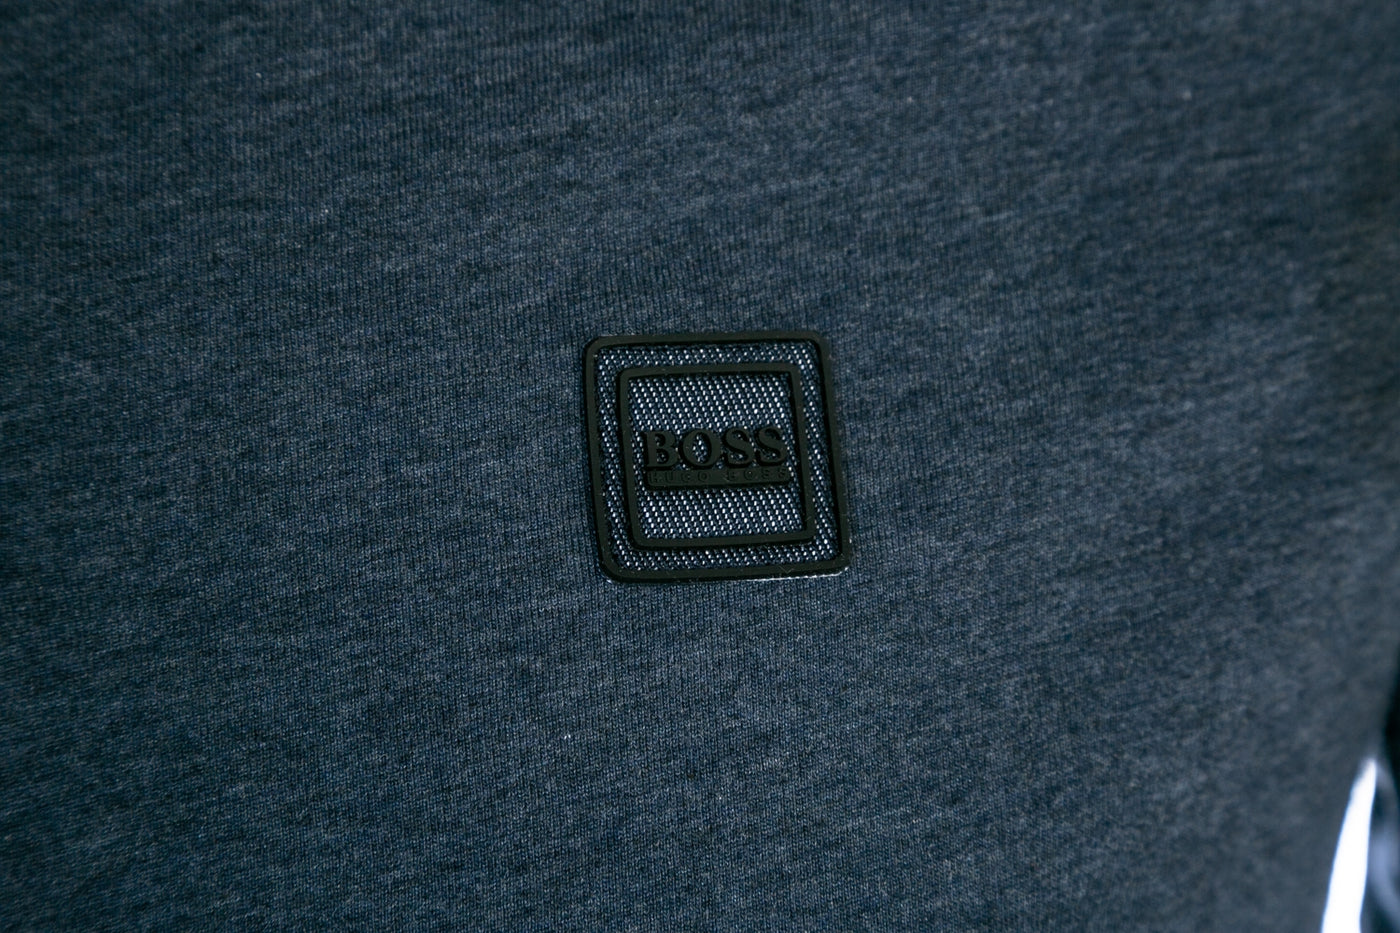 BOSS Pjeans Polo Shirt in Navy